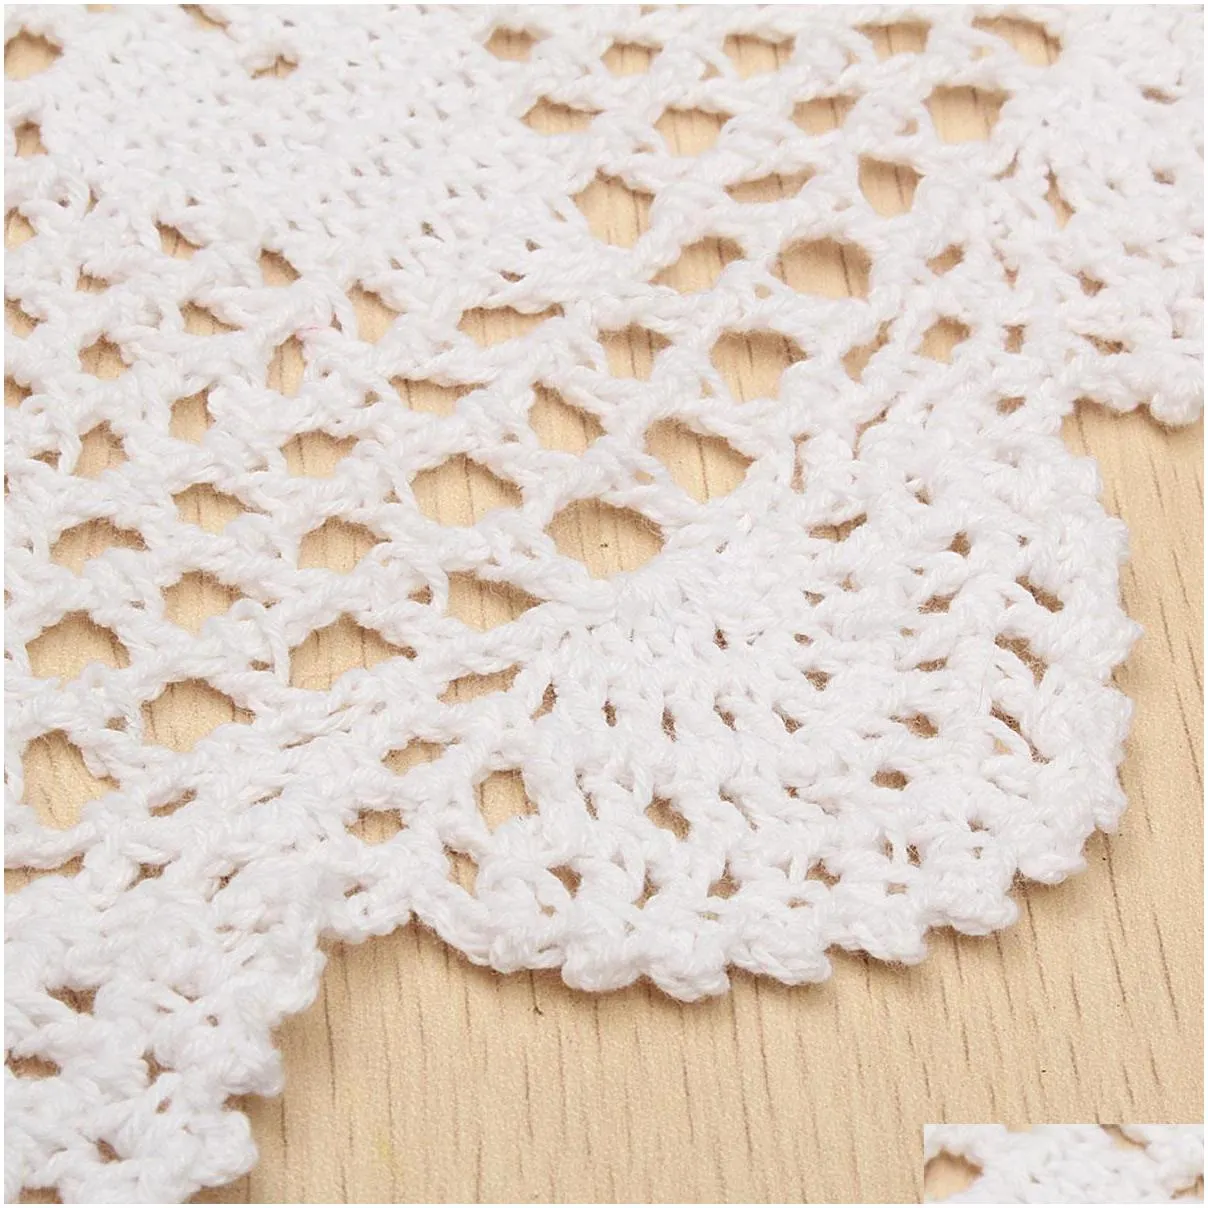 mats pads 37cm round lace hand crocheted doily placemat vintage floral coasters home coffee shop dining table decorative gadgets